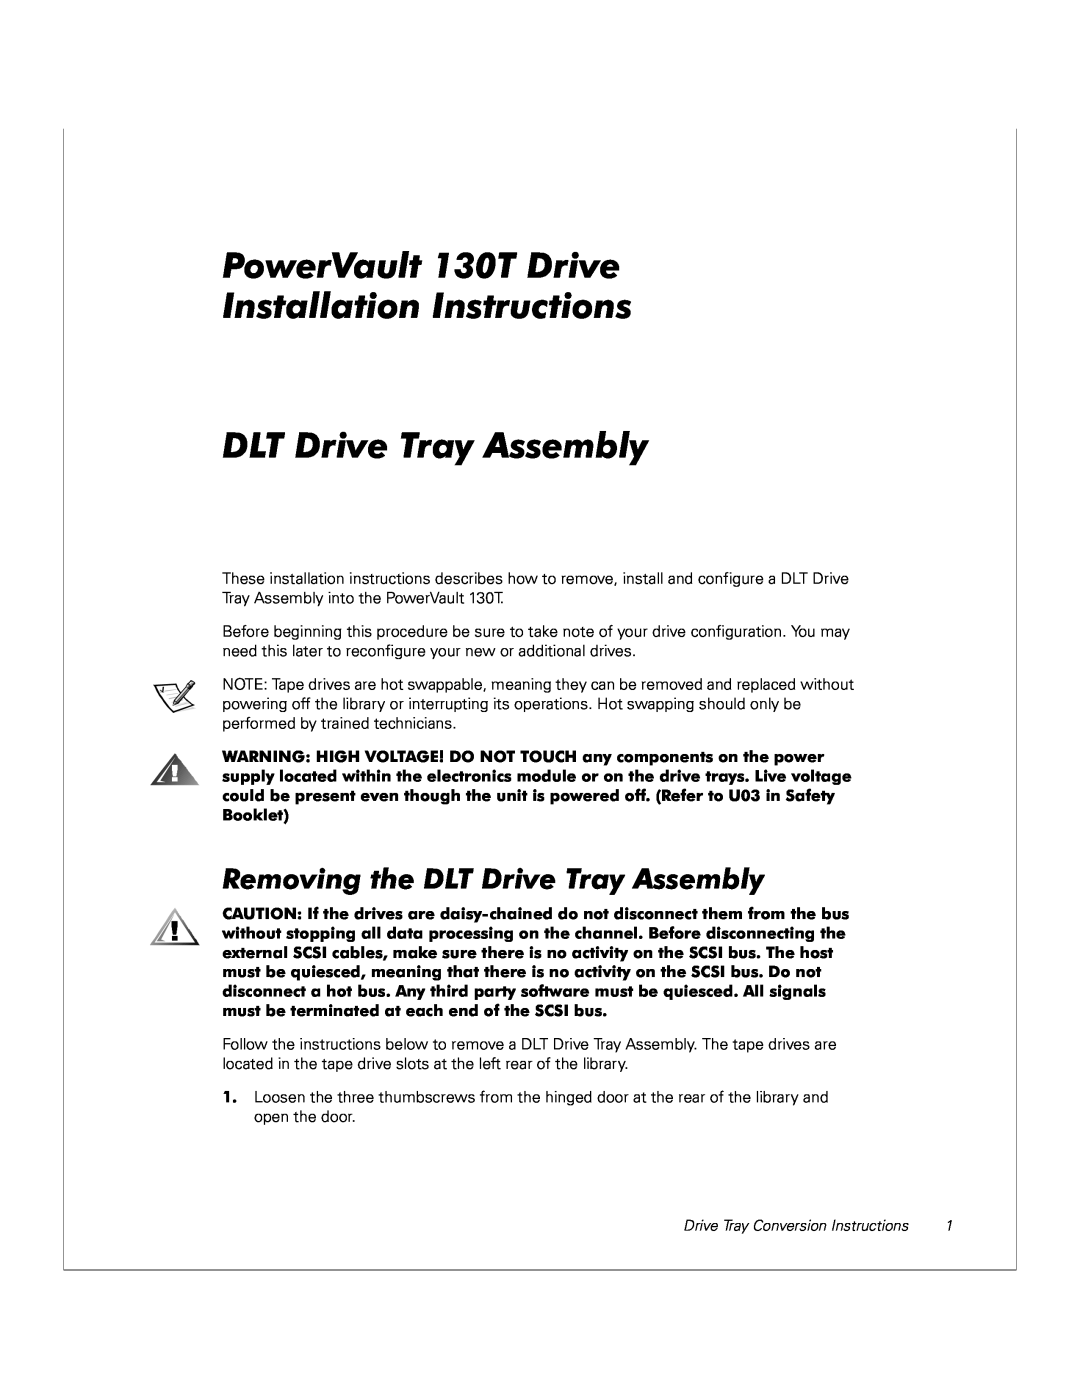 Dell manual Removing the DLT Drive Tray Assembly, PowerVault 130T Drive Installation Instructions 